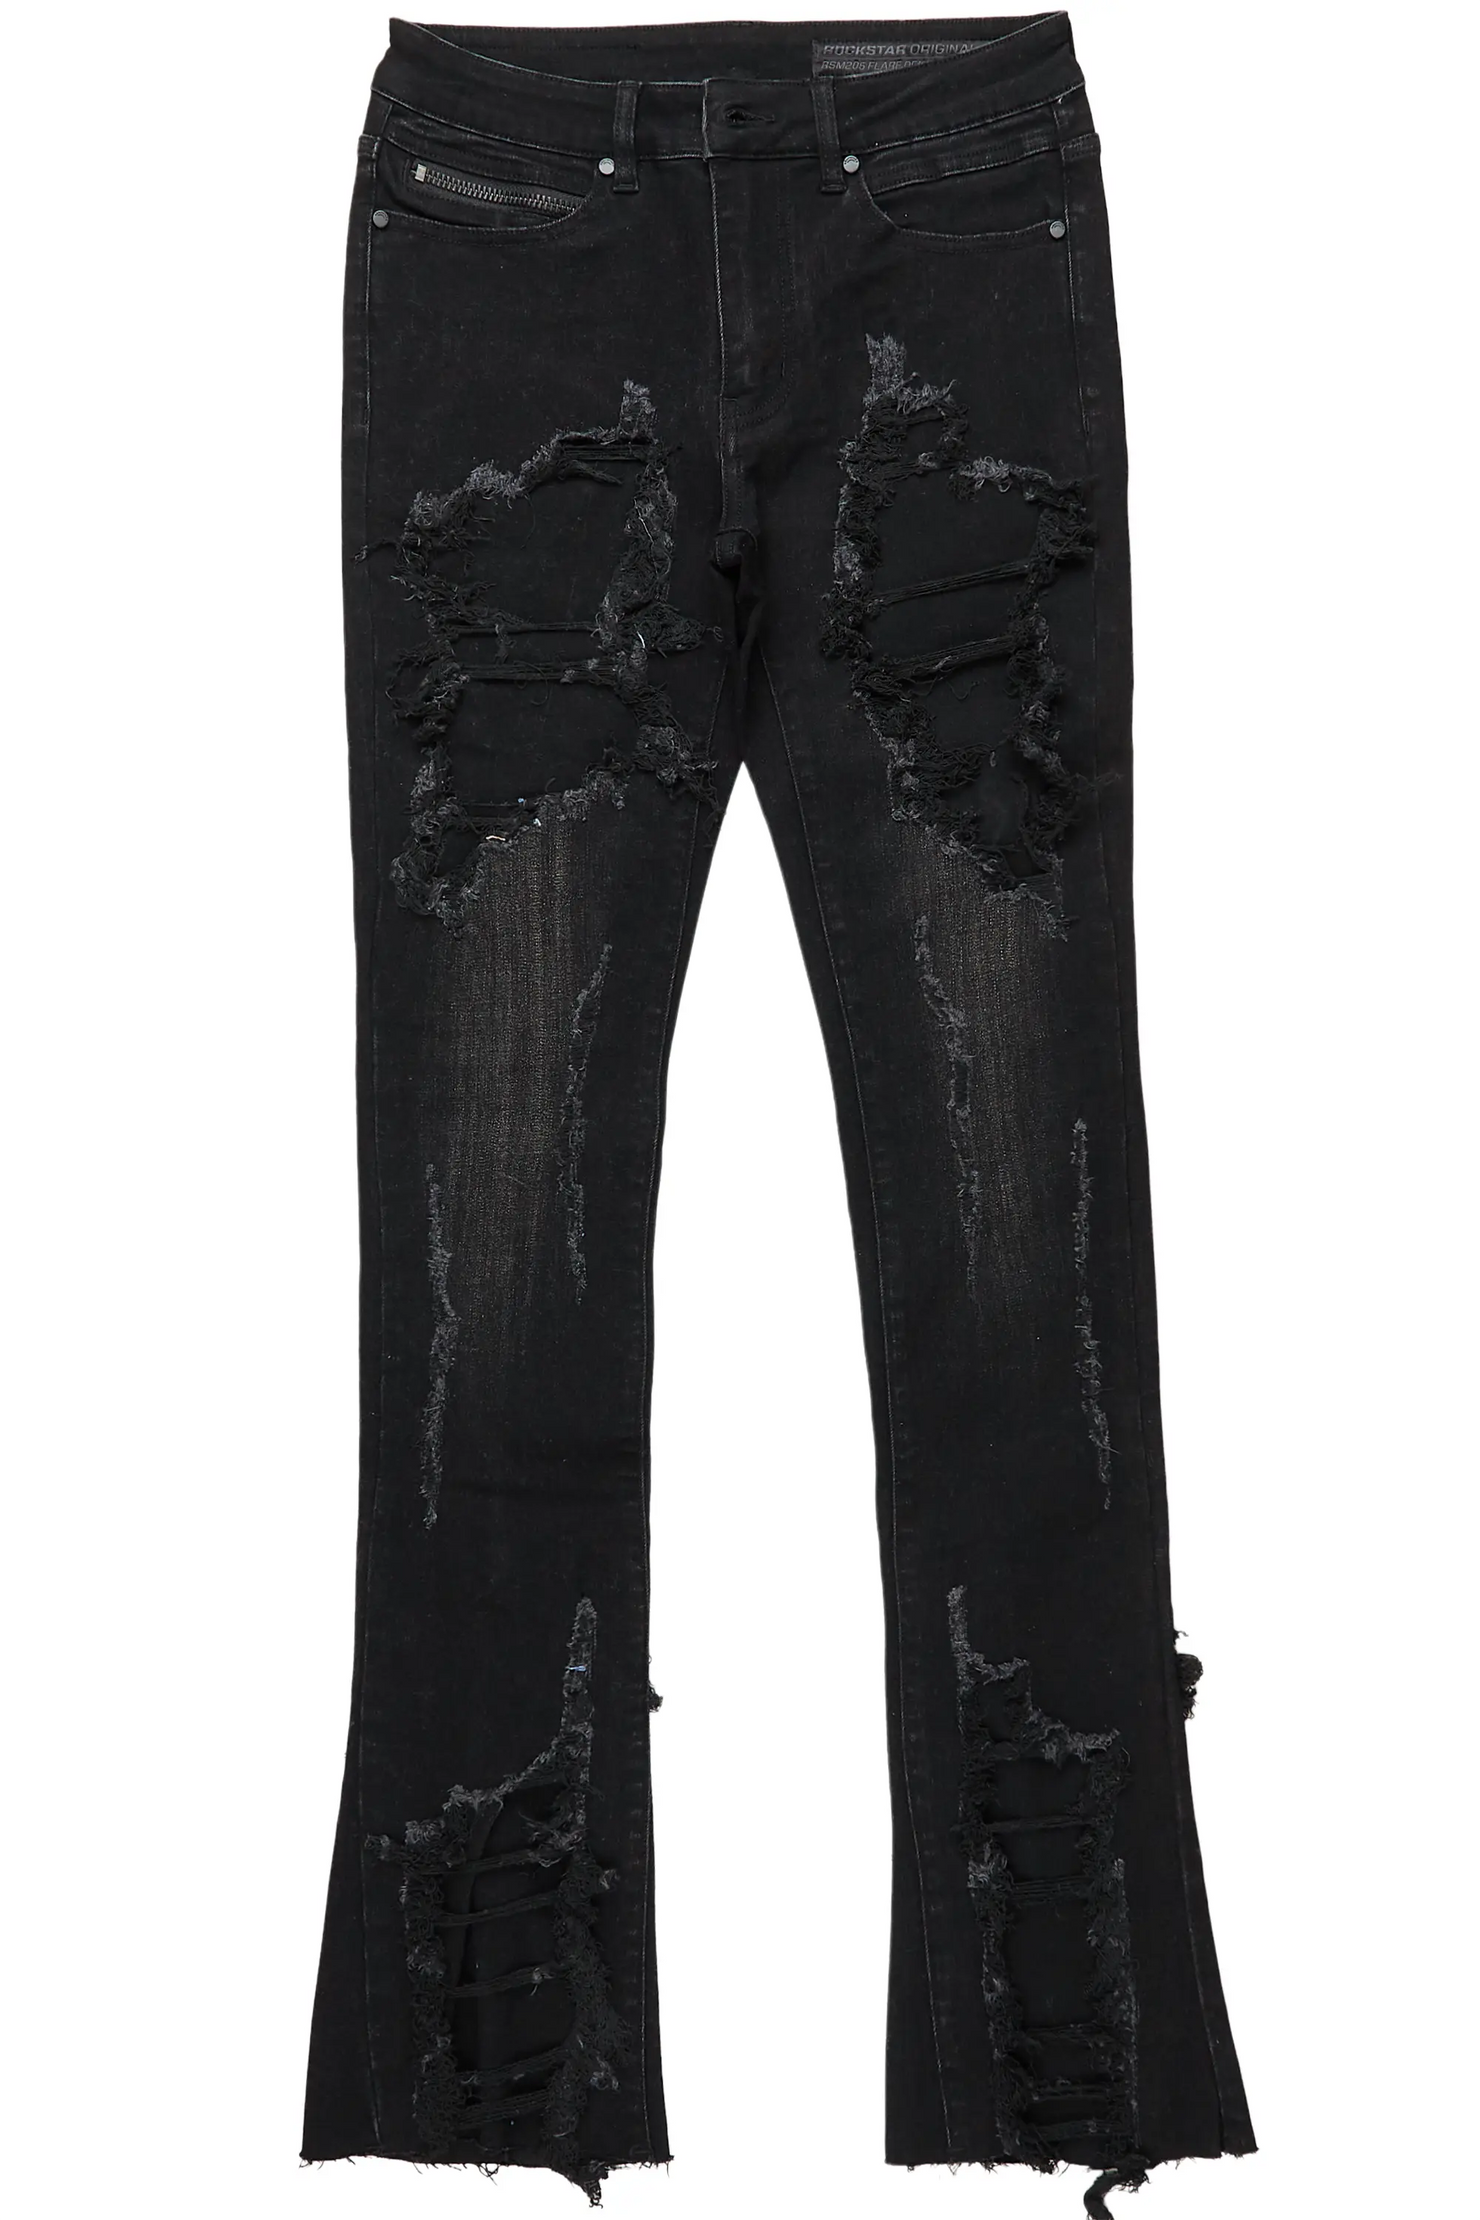 Fateh Jet Black Stacked Flare Jean